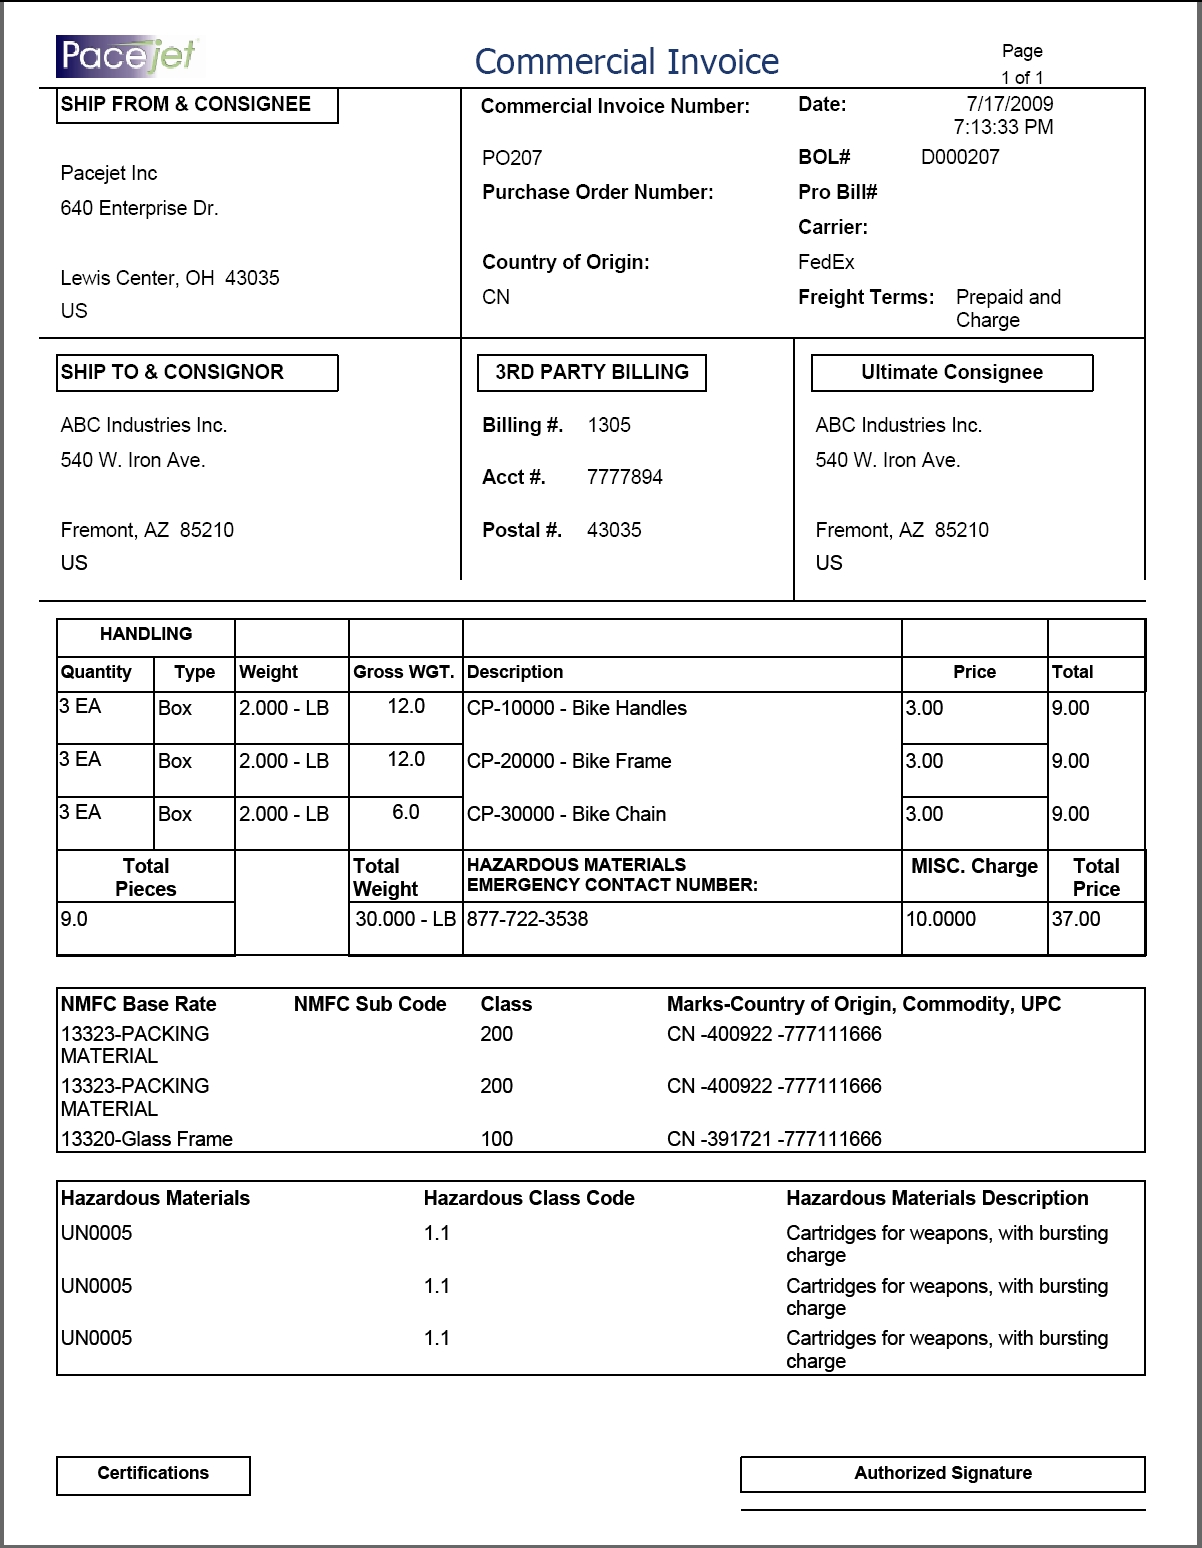 commercial invoice export export shipping pacejet 1202 X 1548